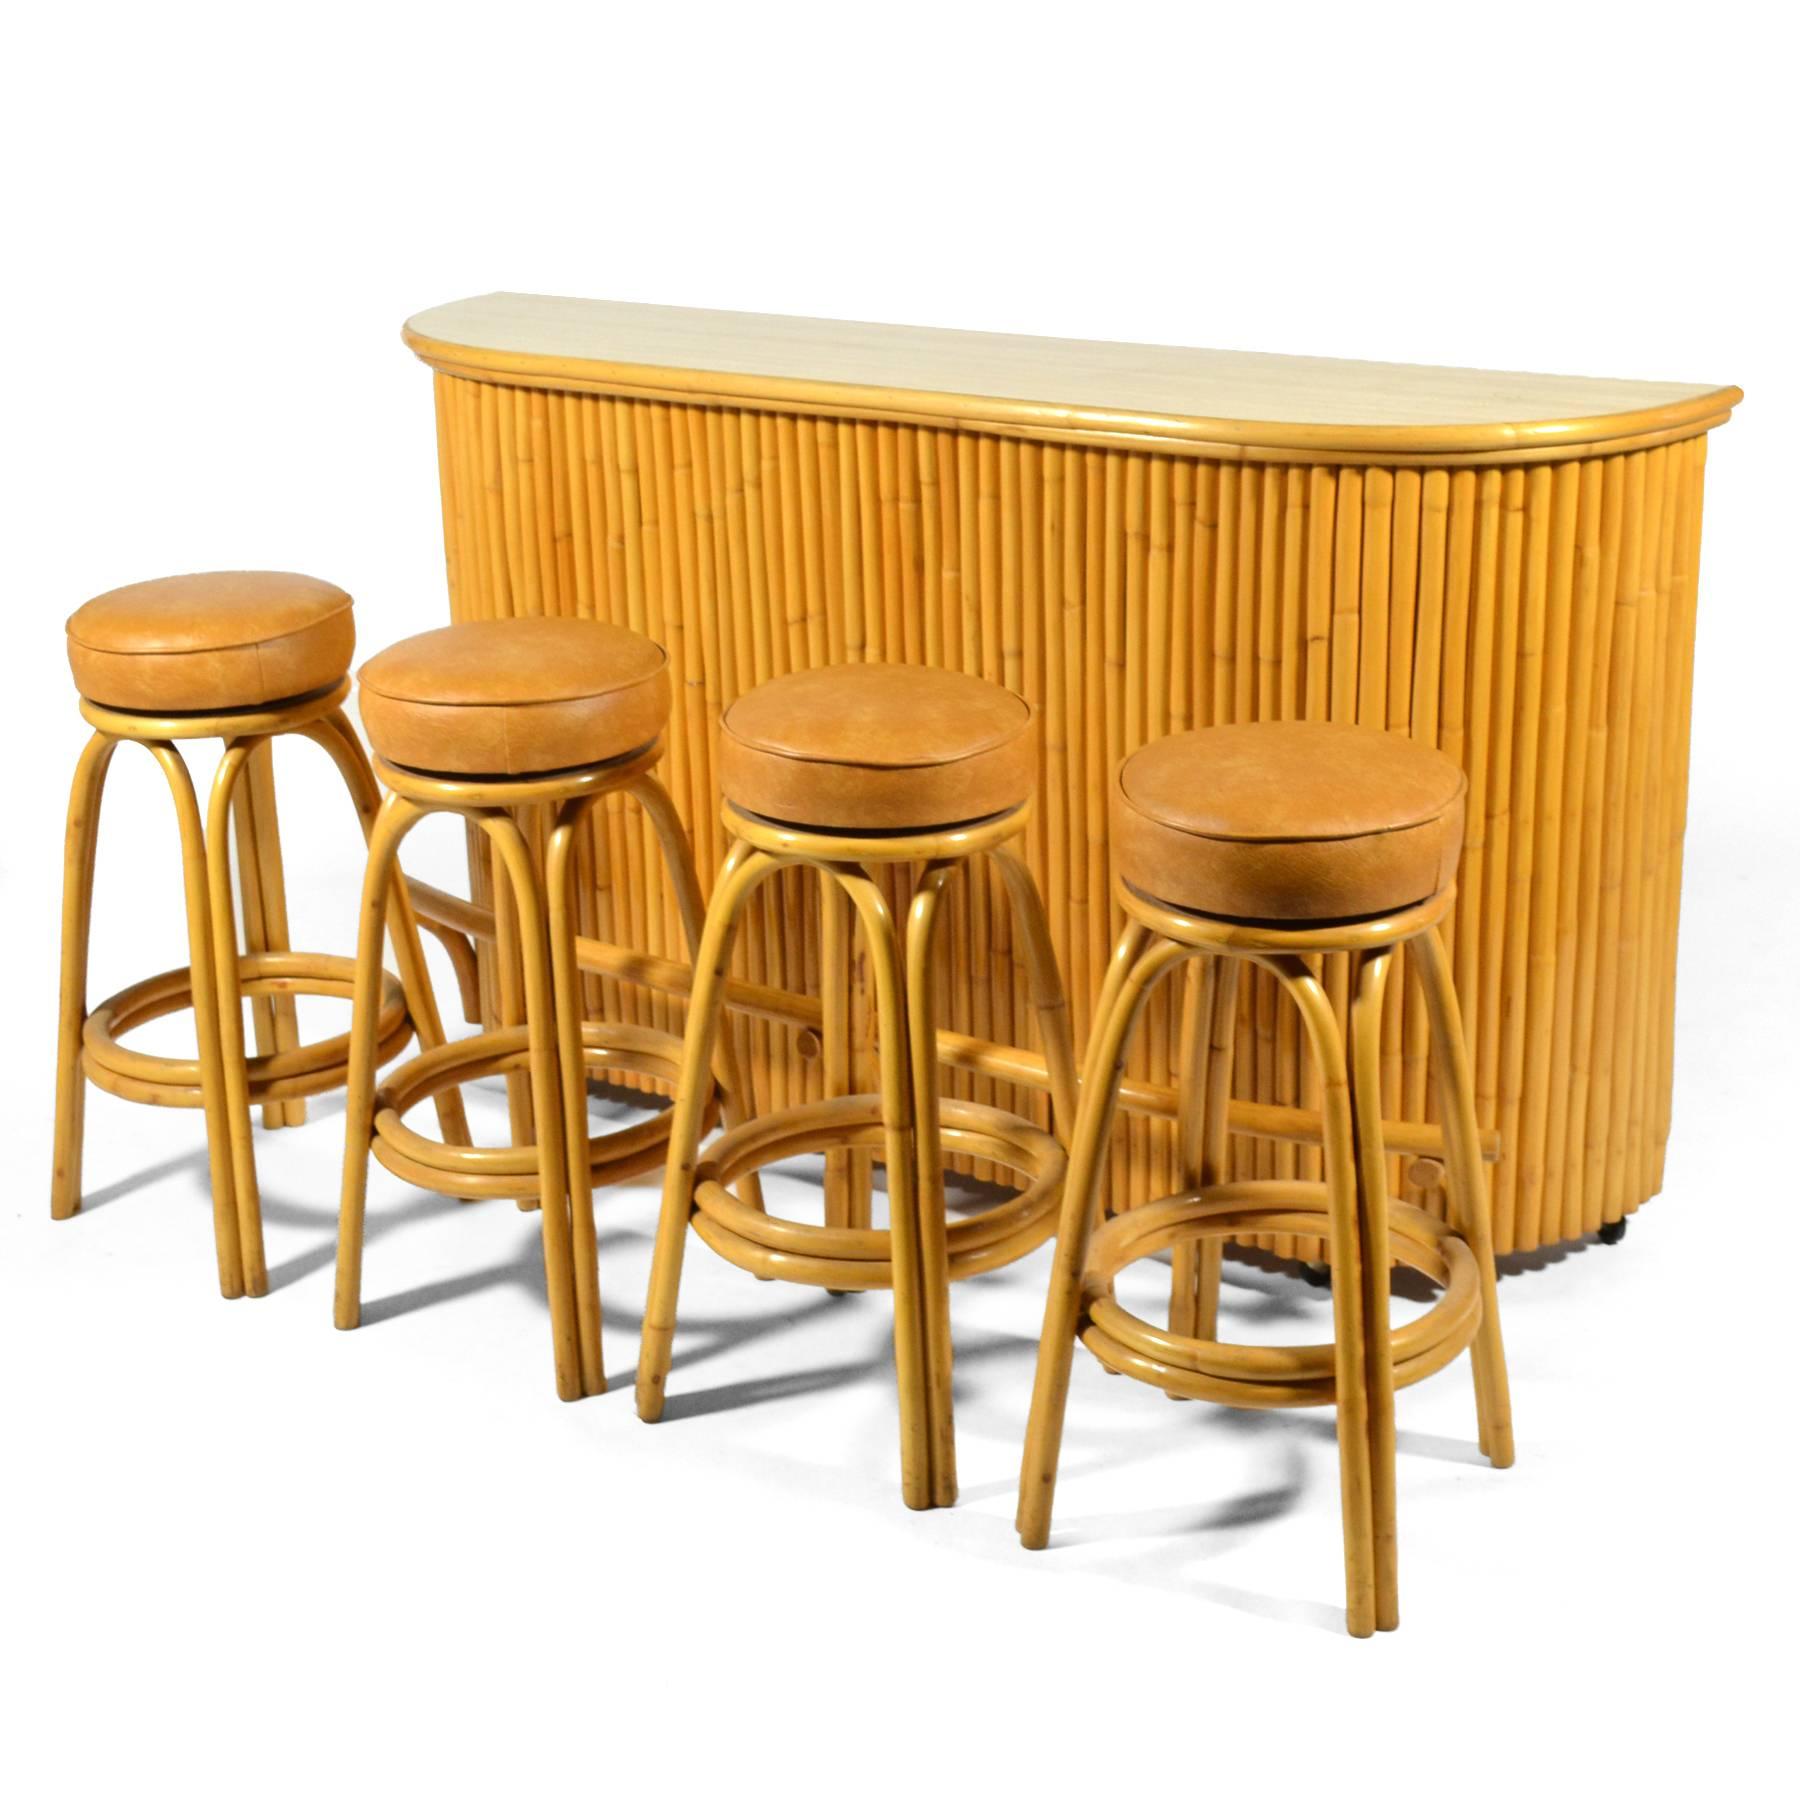 This wonderful rattan bar and matching stools exudes tropical Tiki chic. A beautiful vintage example in great condition, it has a great scale, a curved front, a footrest, two shelves a cutting board and a drawer in the back. The stools have